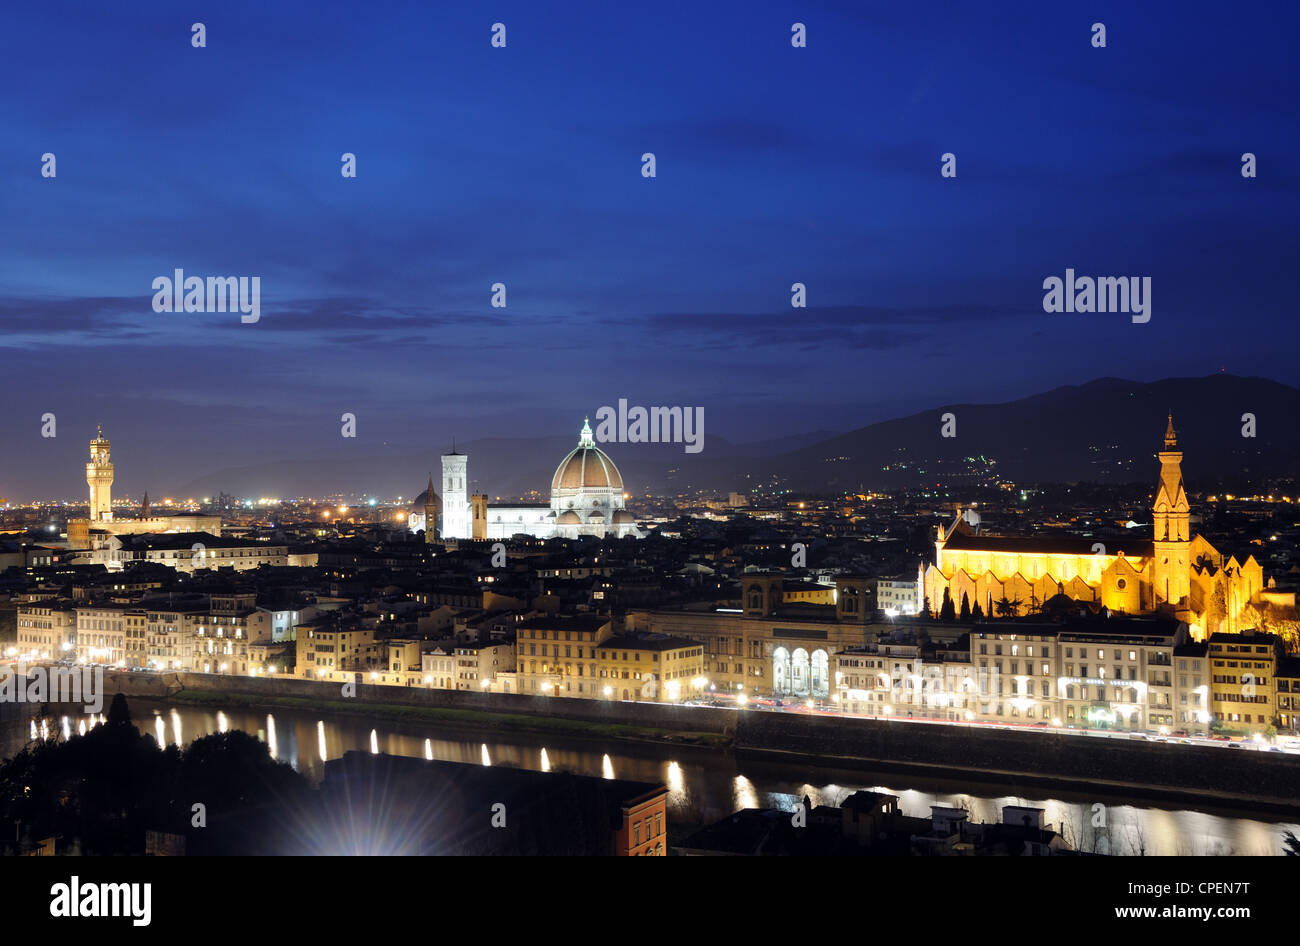 The Florentine skyline, including the Cathedral, Palazzo Vecchio & Basilica di Santa Croce, at dusk in Florence, Tuscany, Italy Stock Photo